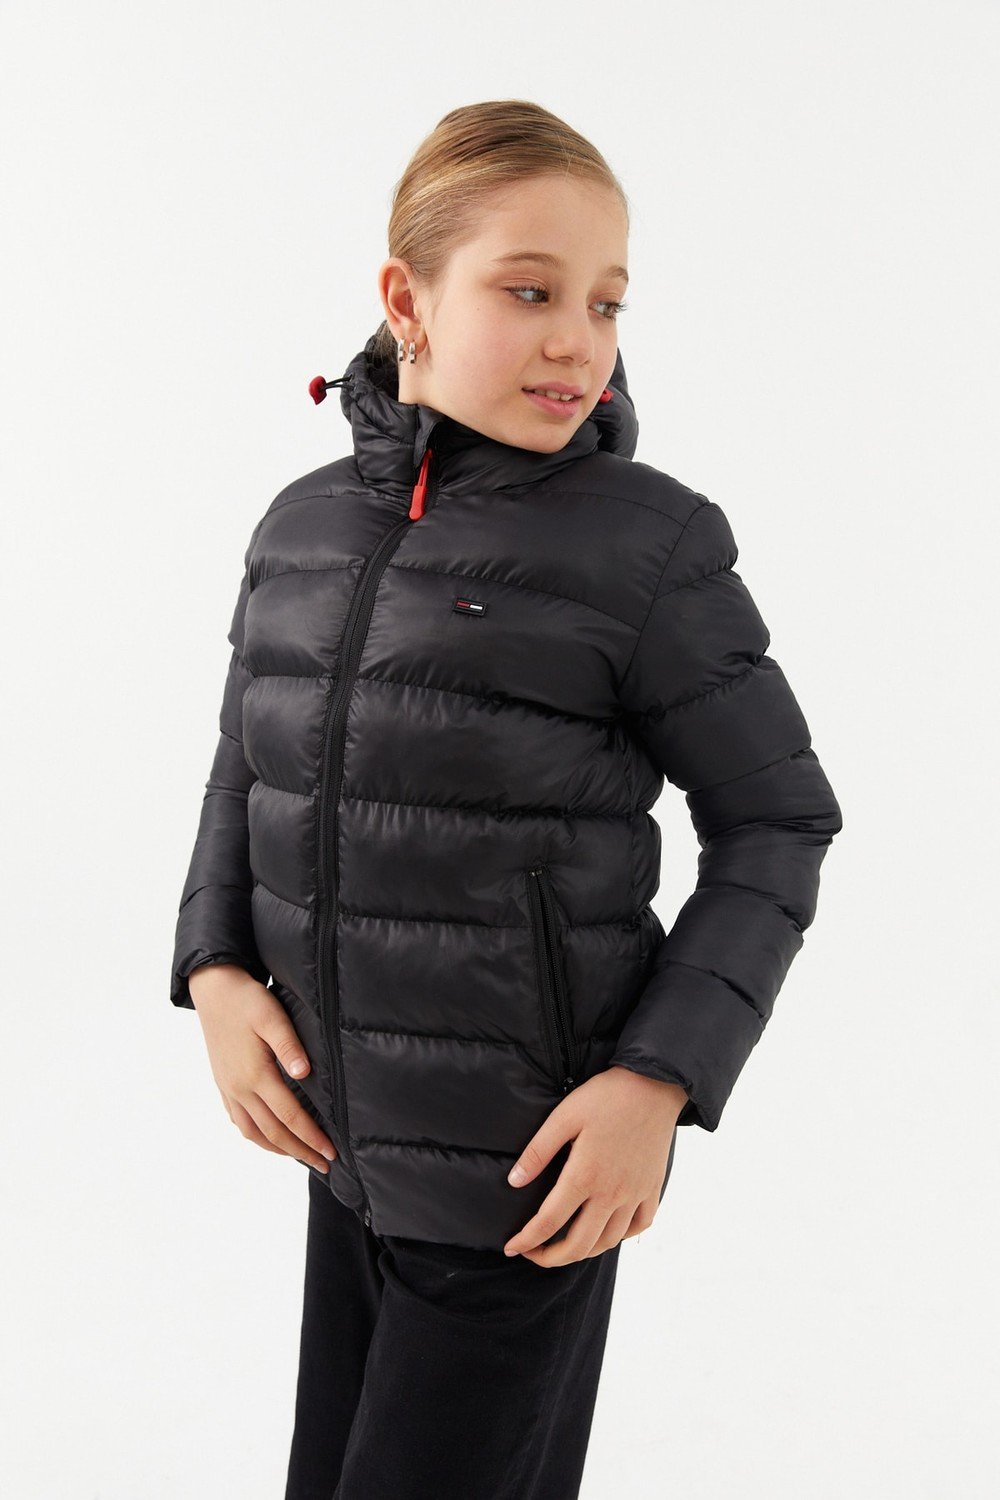 River Club Girls' Waterproof And Windproof Thick Lined Black Hooded Coat.